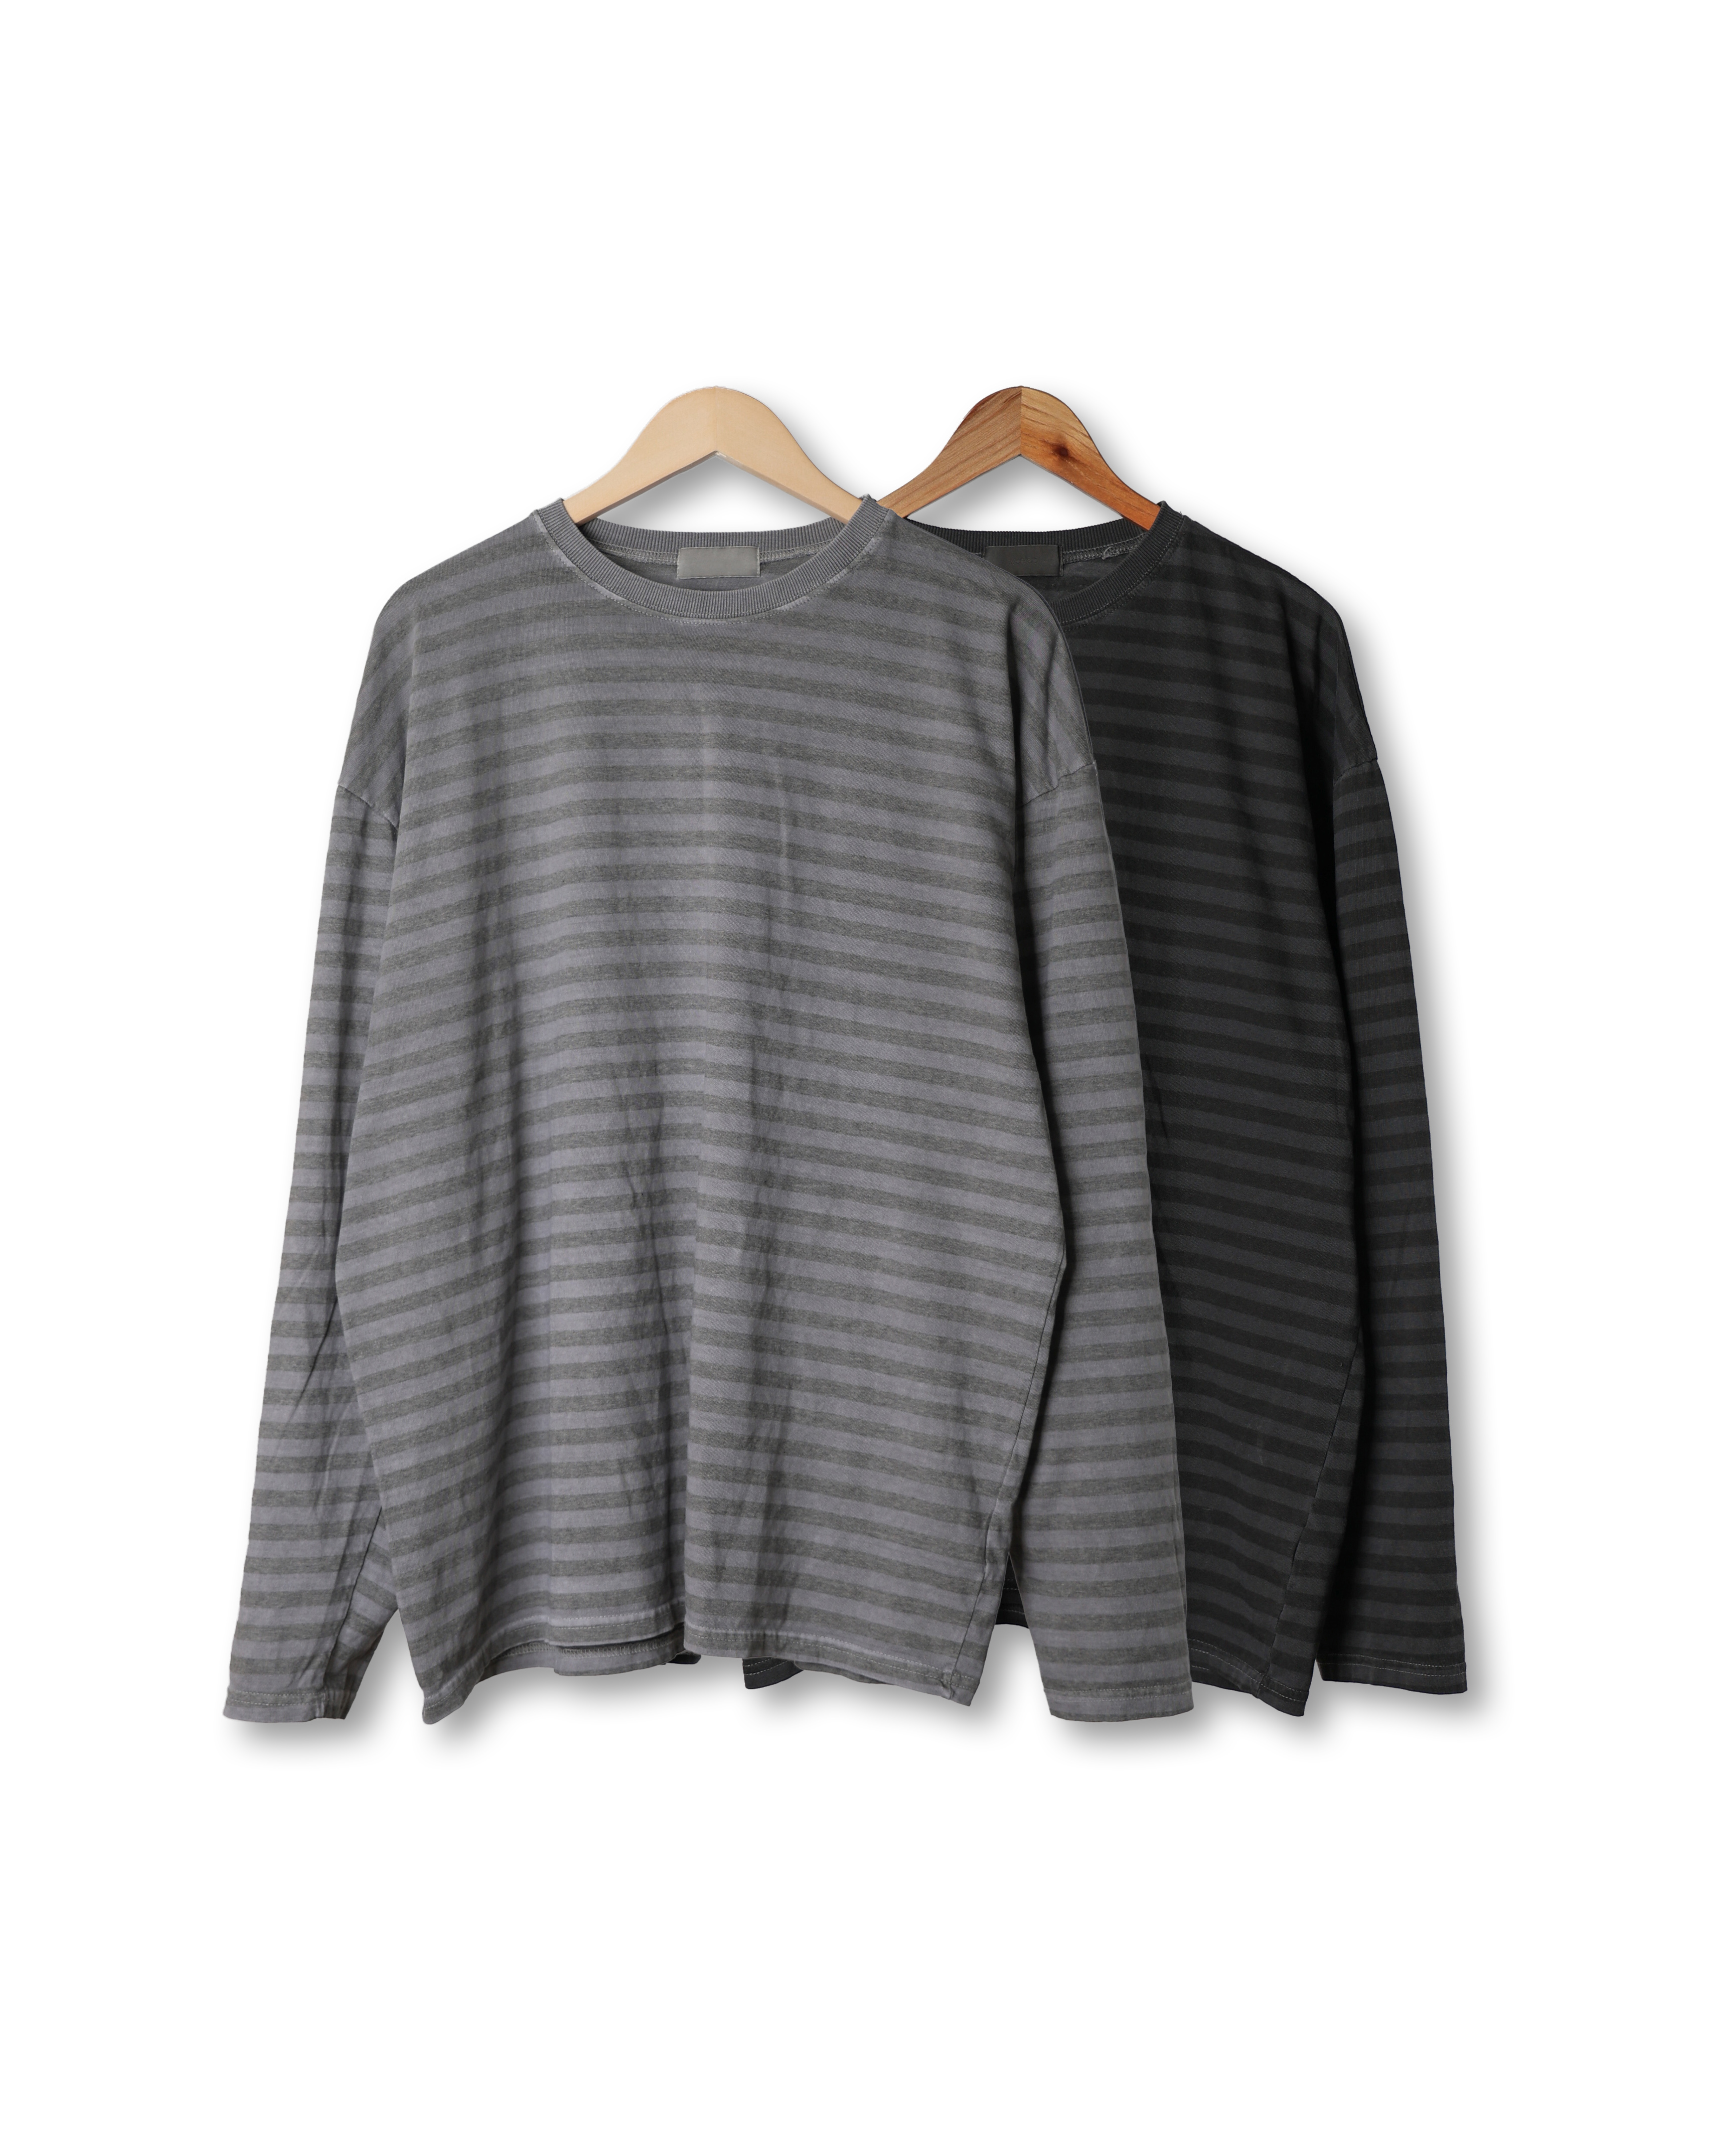 MOS Pigments Stripe Long Sleeve (Charcoal/Gray)